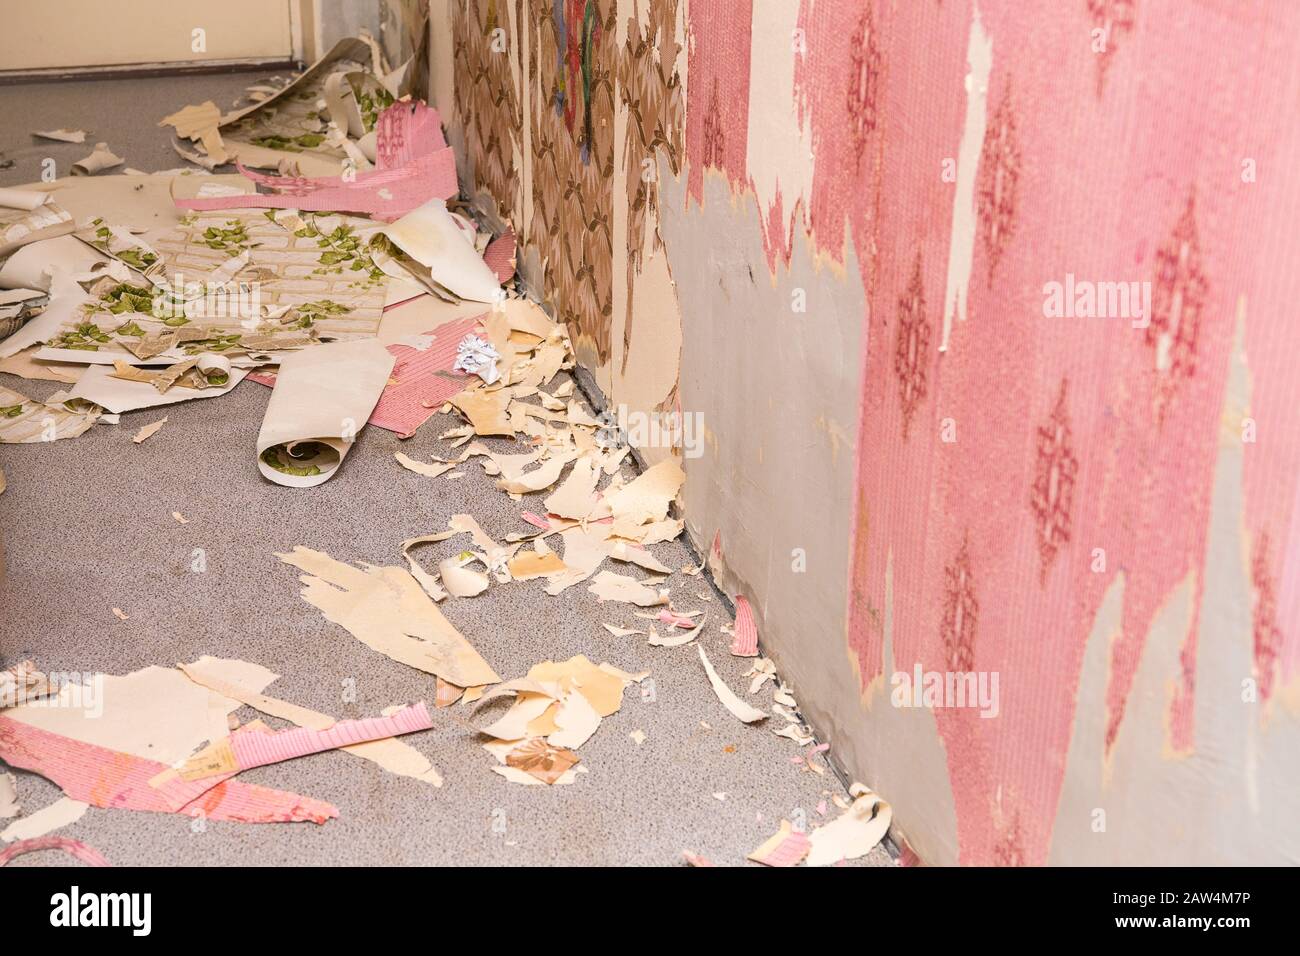 Removing old retro style wallpaper from concrete wall. Home renovation concept. Stock Photo